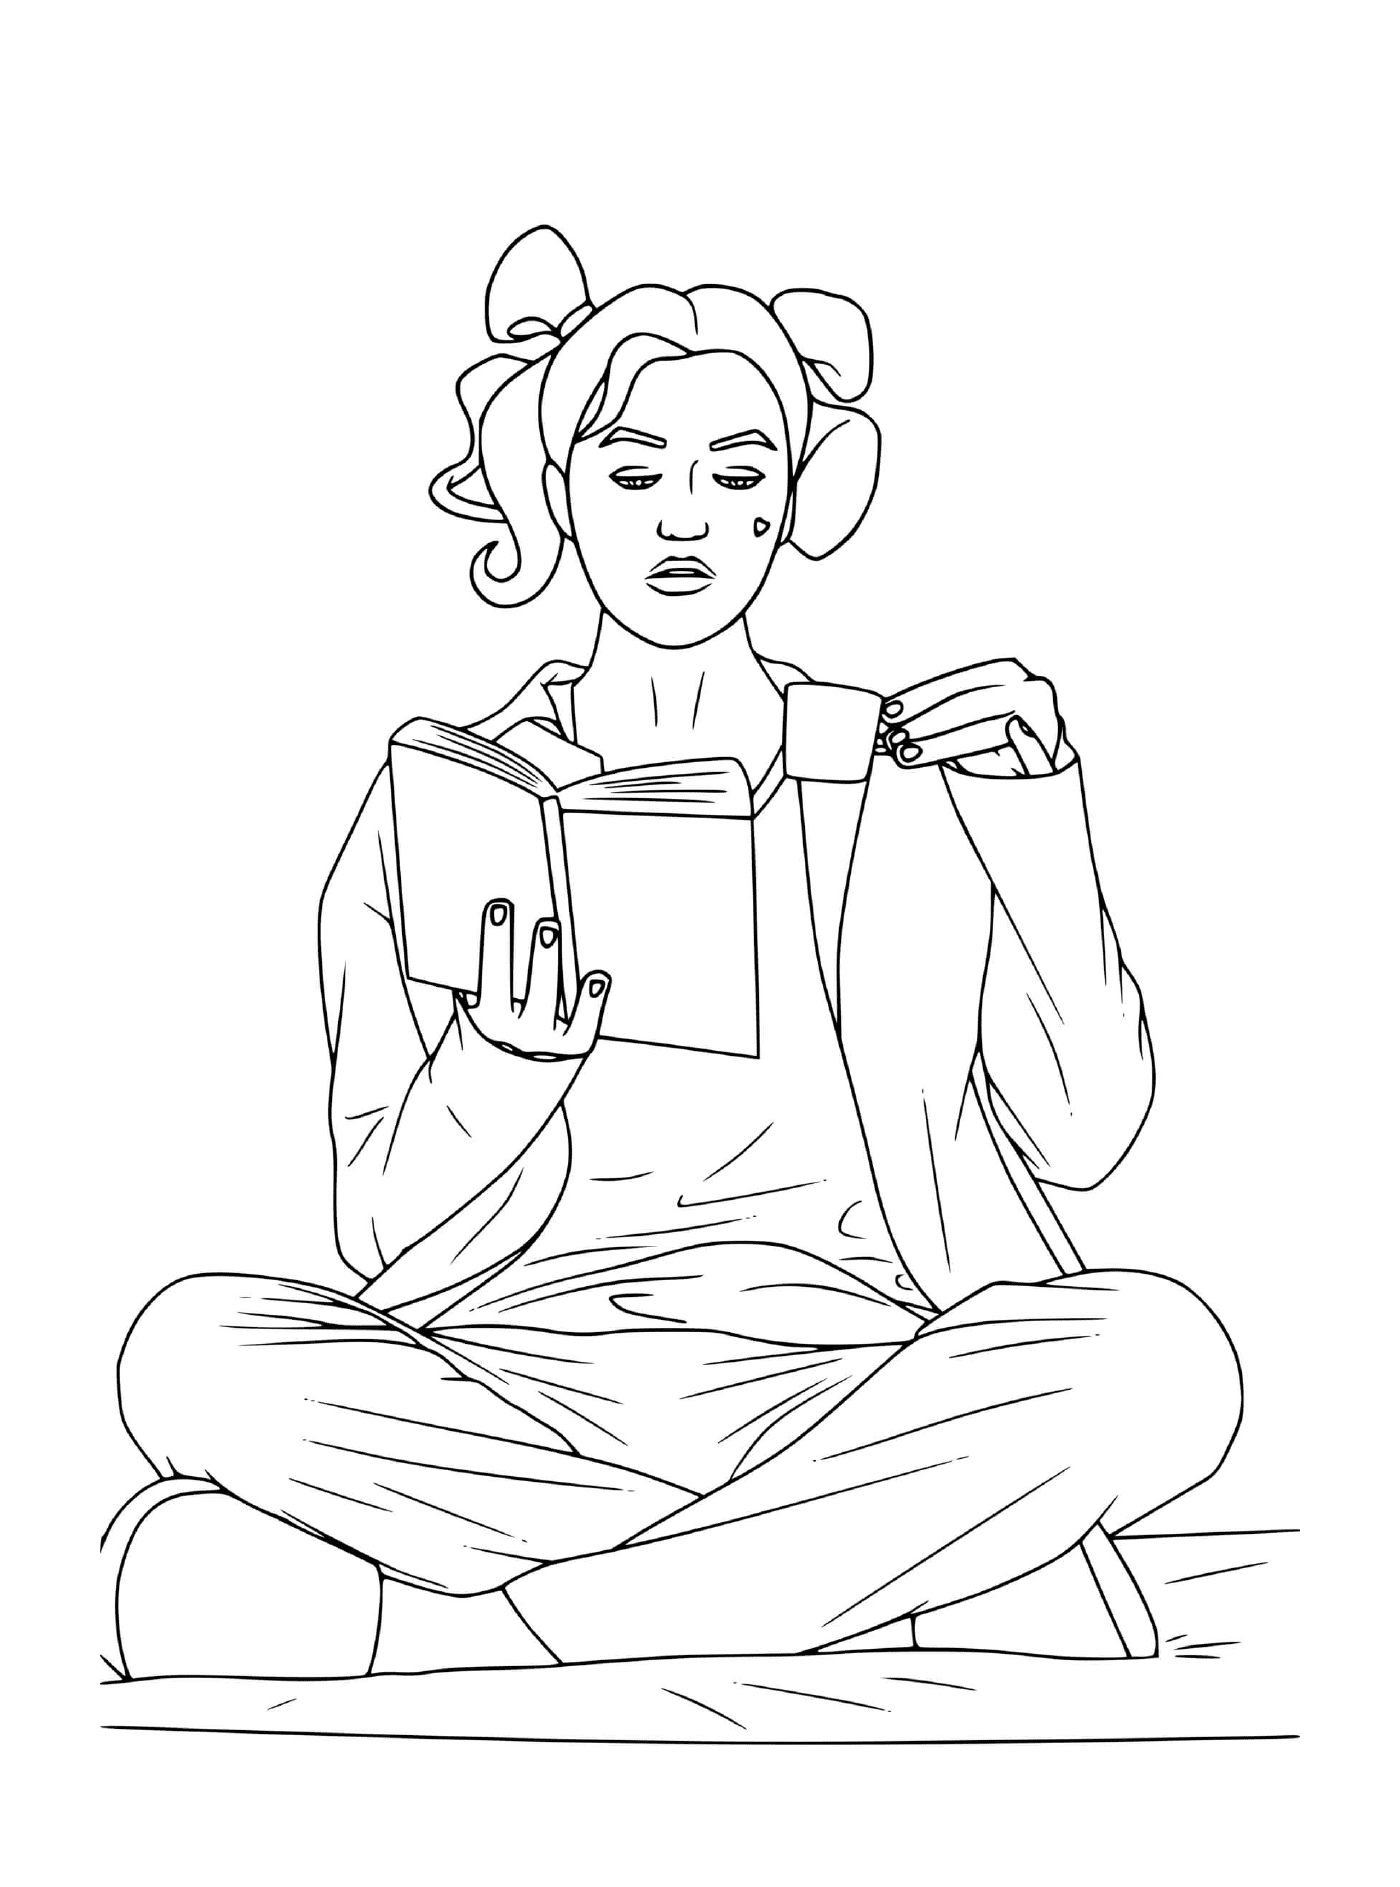  Woman sitting on the floor, reading 